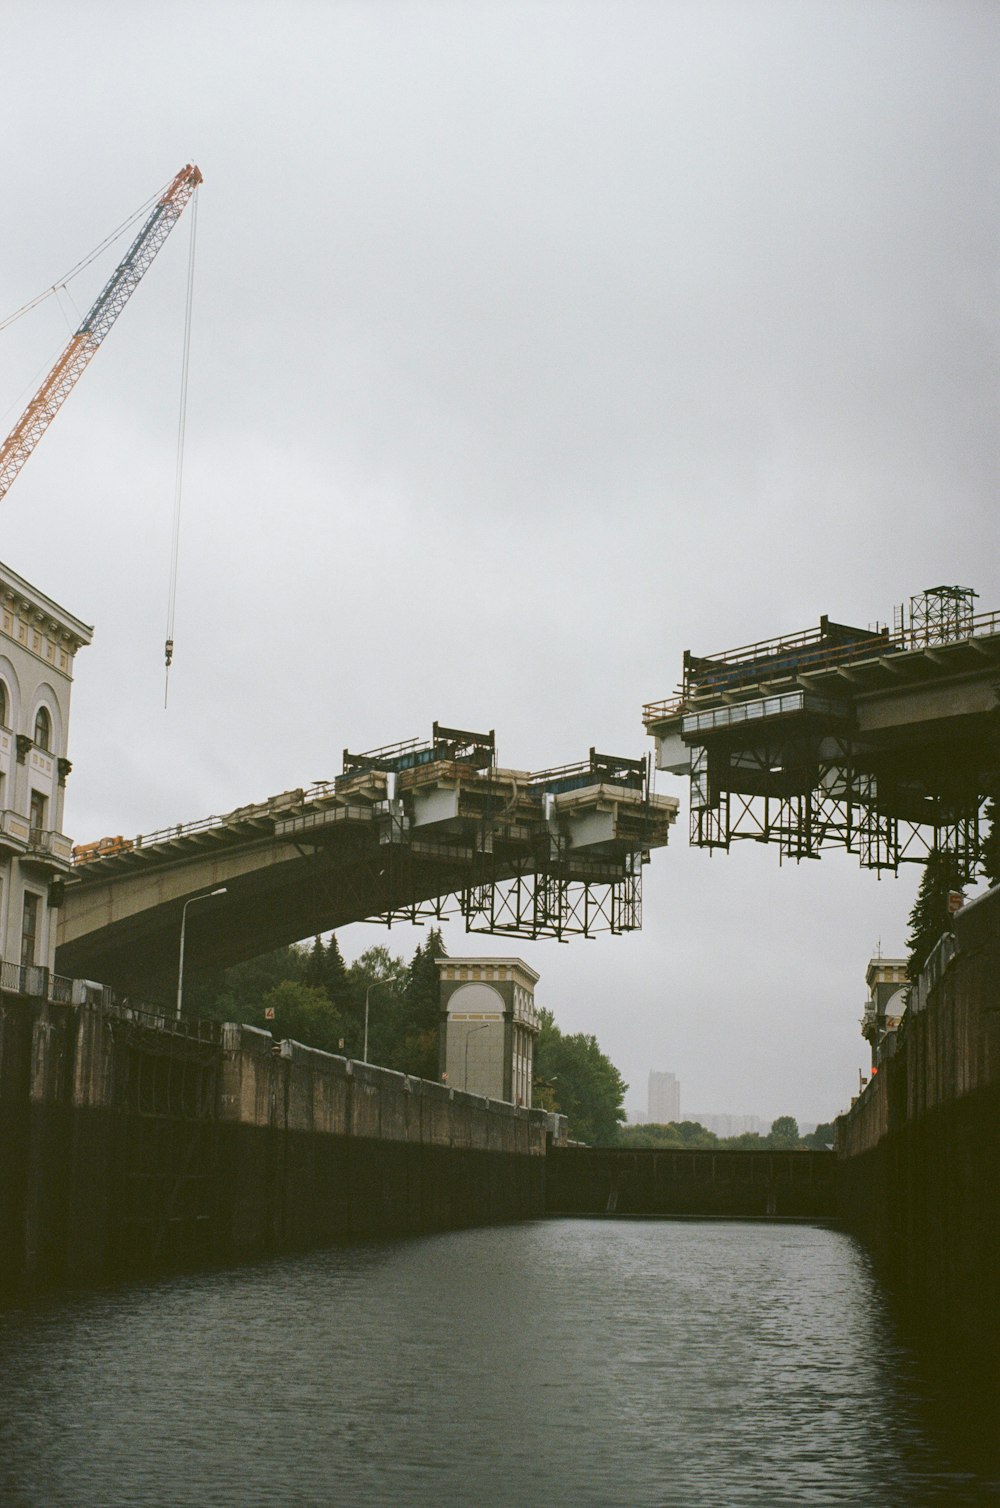 a crane is on a bridge over a body of water